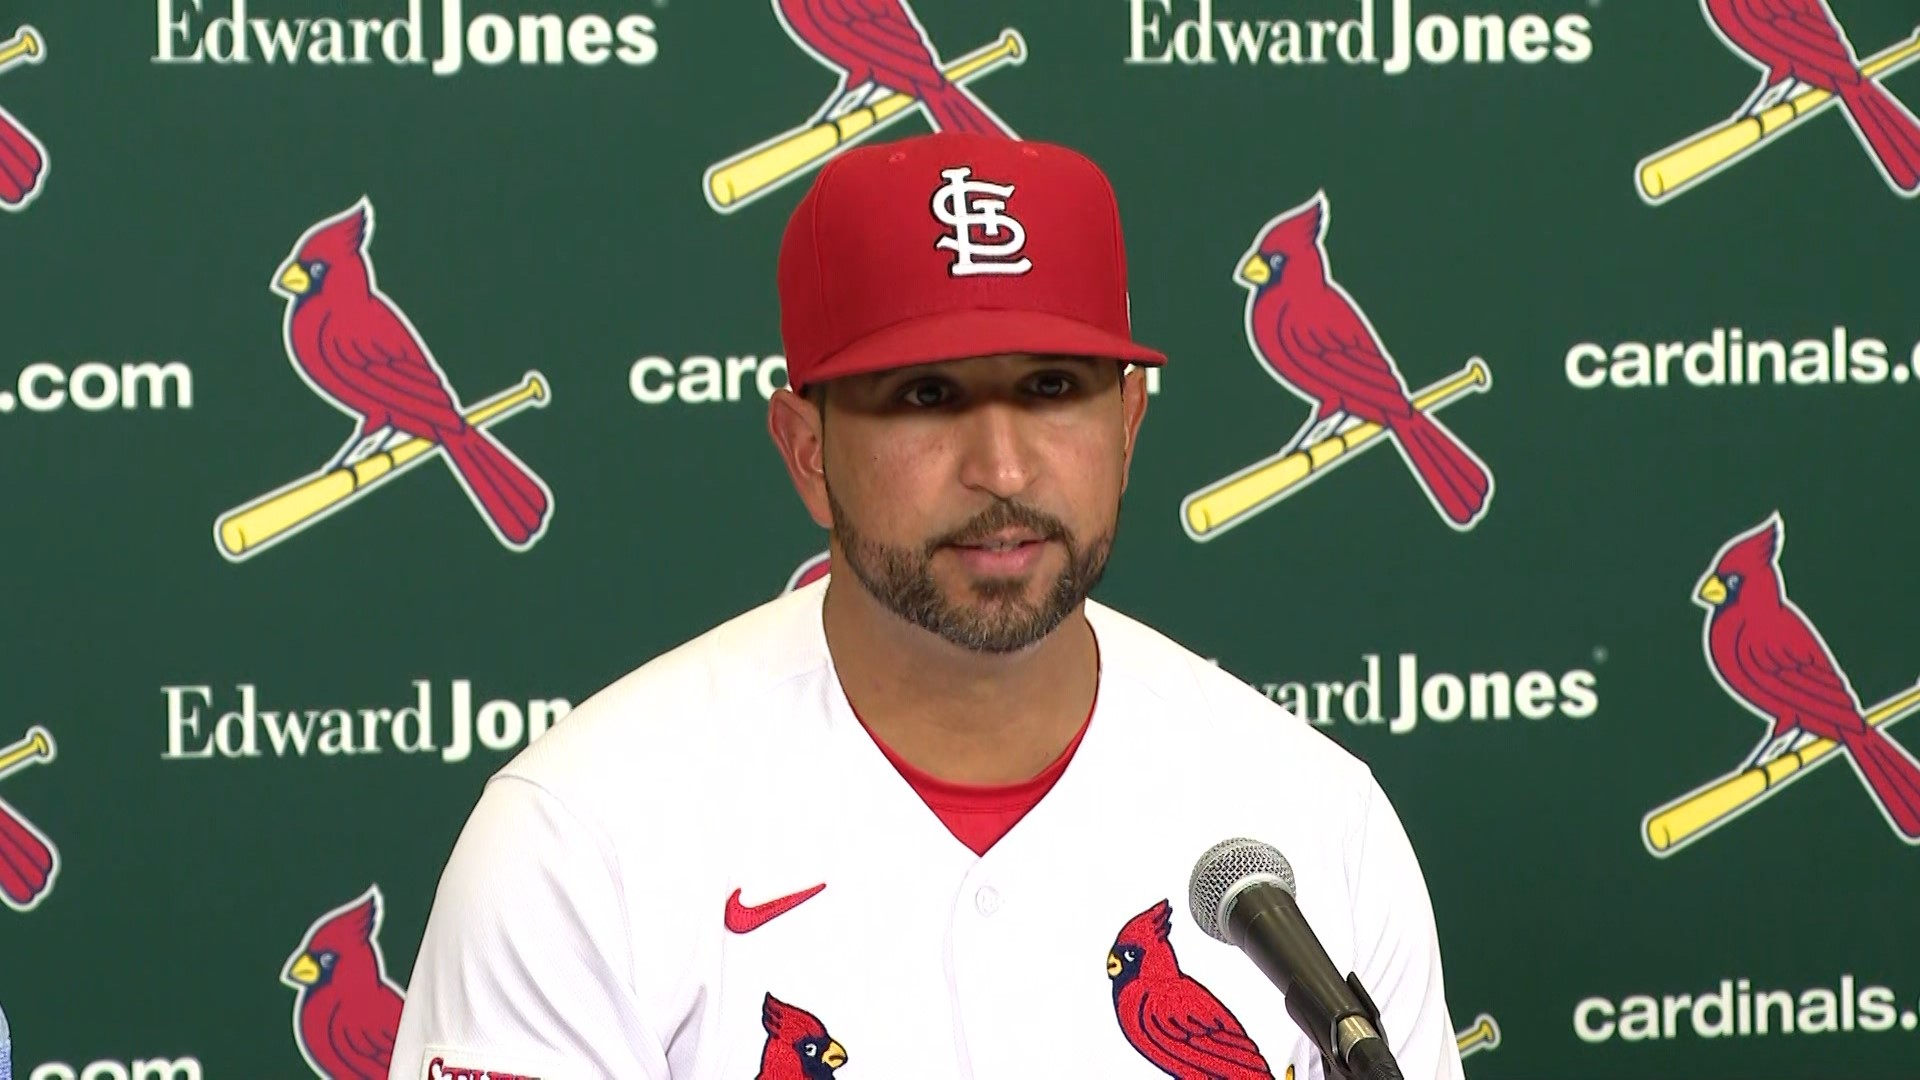 St. Louis Cardinals manager Oliver Marmol talks to the media after pitcher Adam Wainwright got his 200th career win with a 1-0 win over the Milwaukee Brewers.